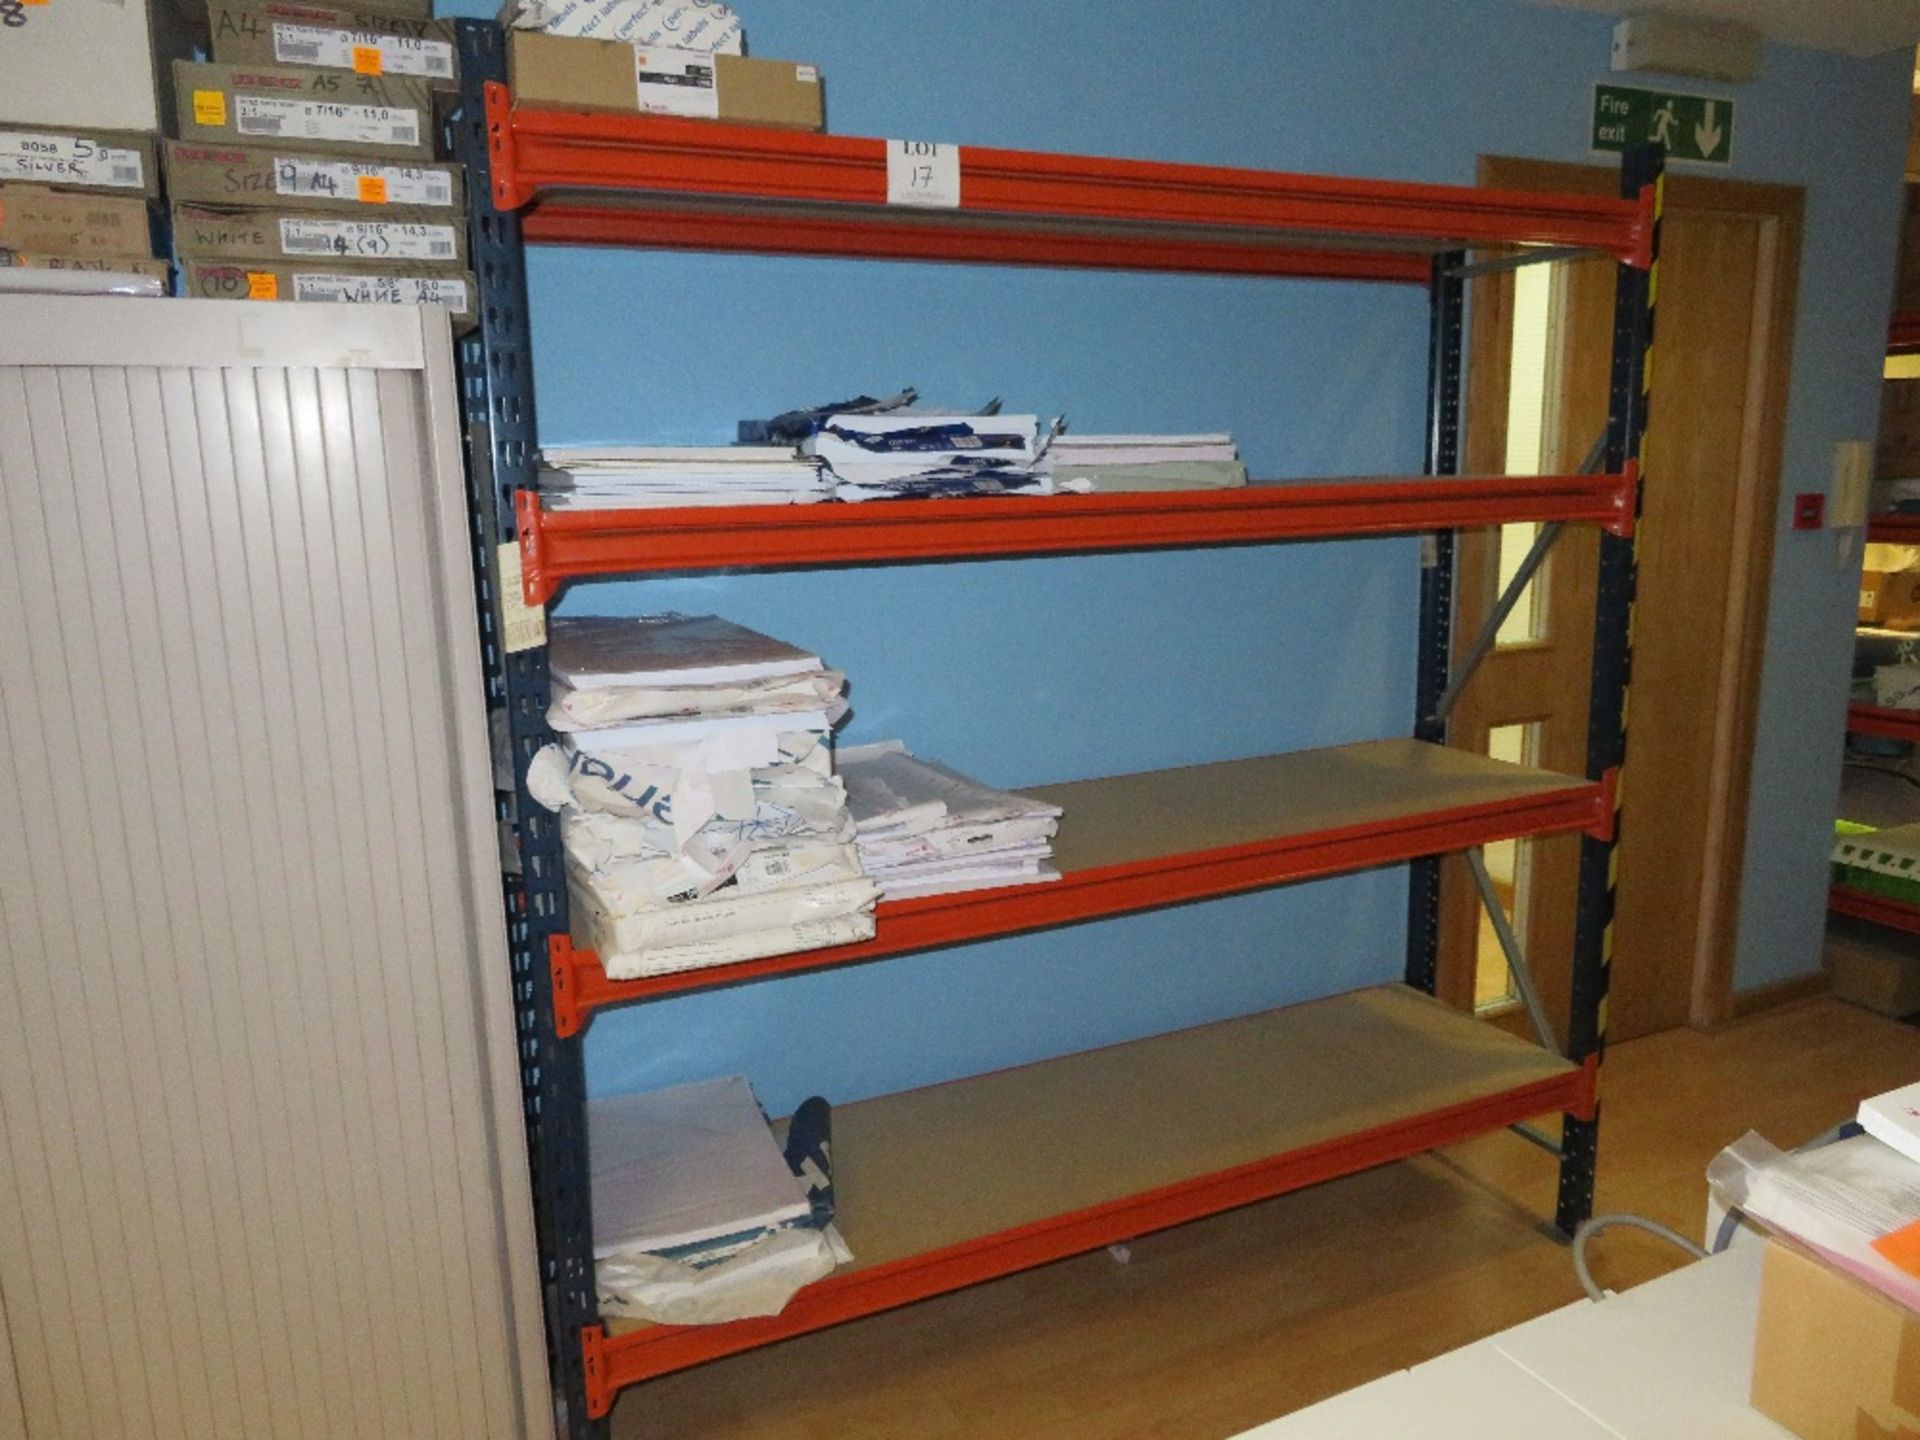 1x Bay of Blue / Orange Boltless Steel Storage Racking - Contents Not Included